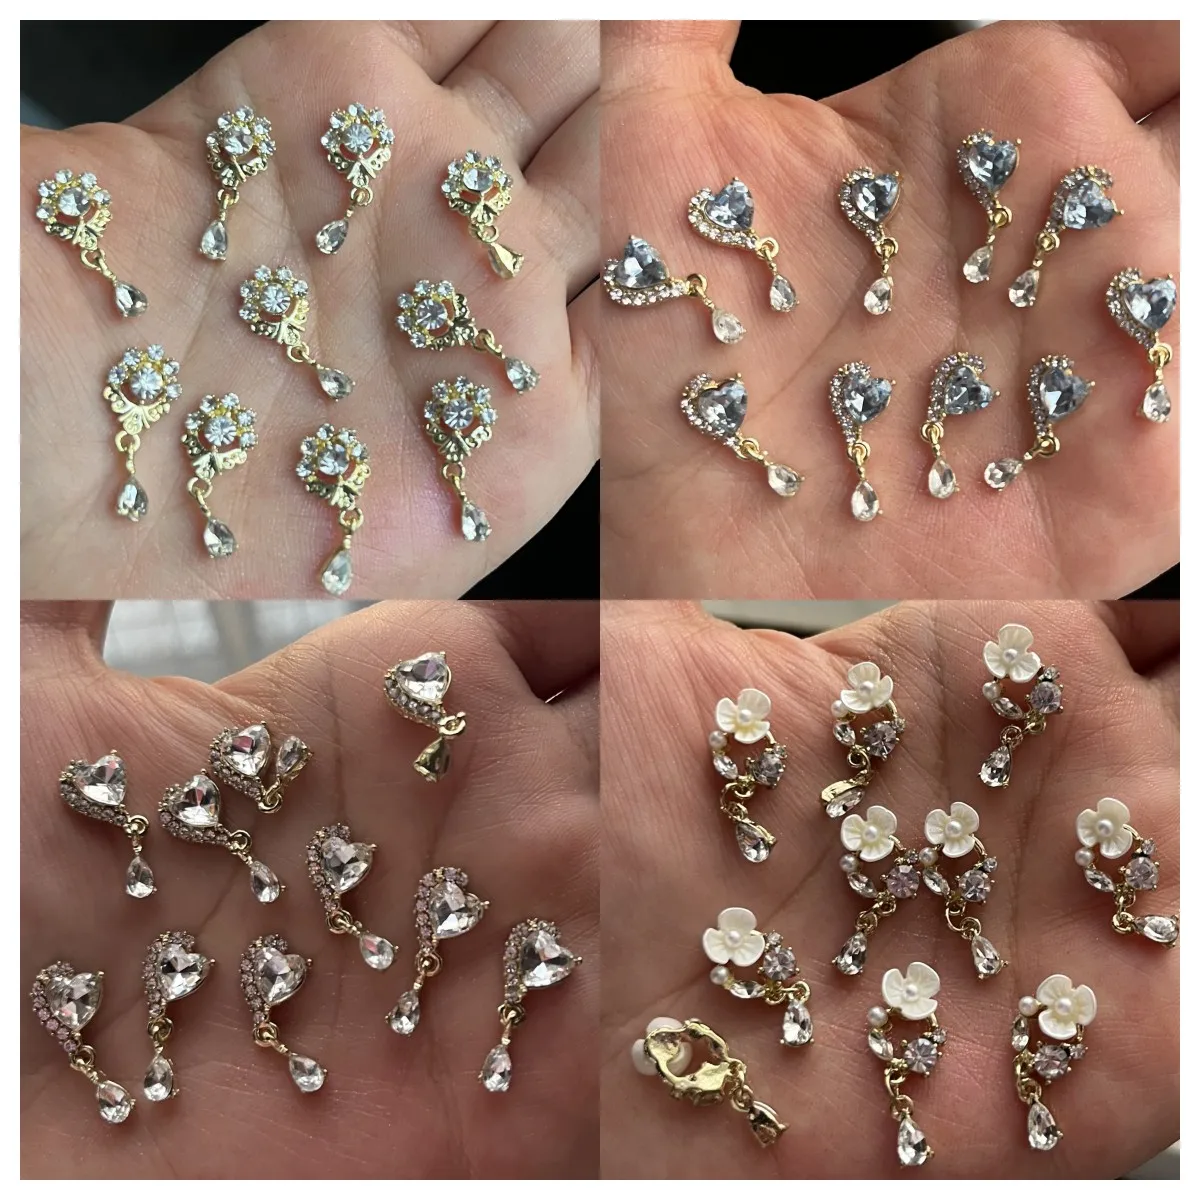 

10PCS Luxury Nail Art Dangle Jewelry Mixed Style 3D Nail Charms Design Alloy Crystal Gems Rhinestones For Manicure Decorations #